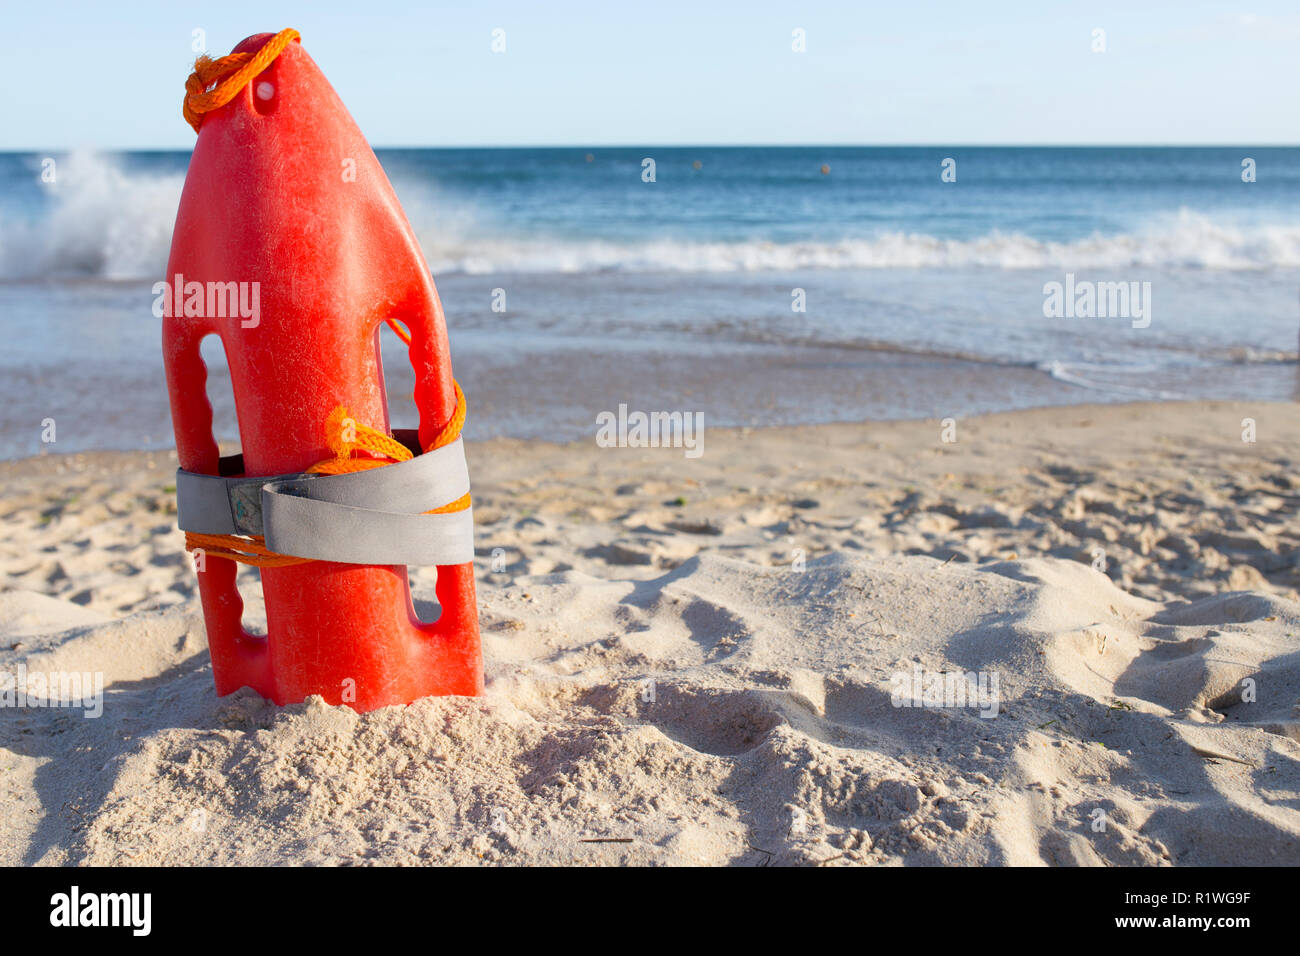 Orange rescue buoy planted on sand beach. Sea weaves as background Stock Photo